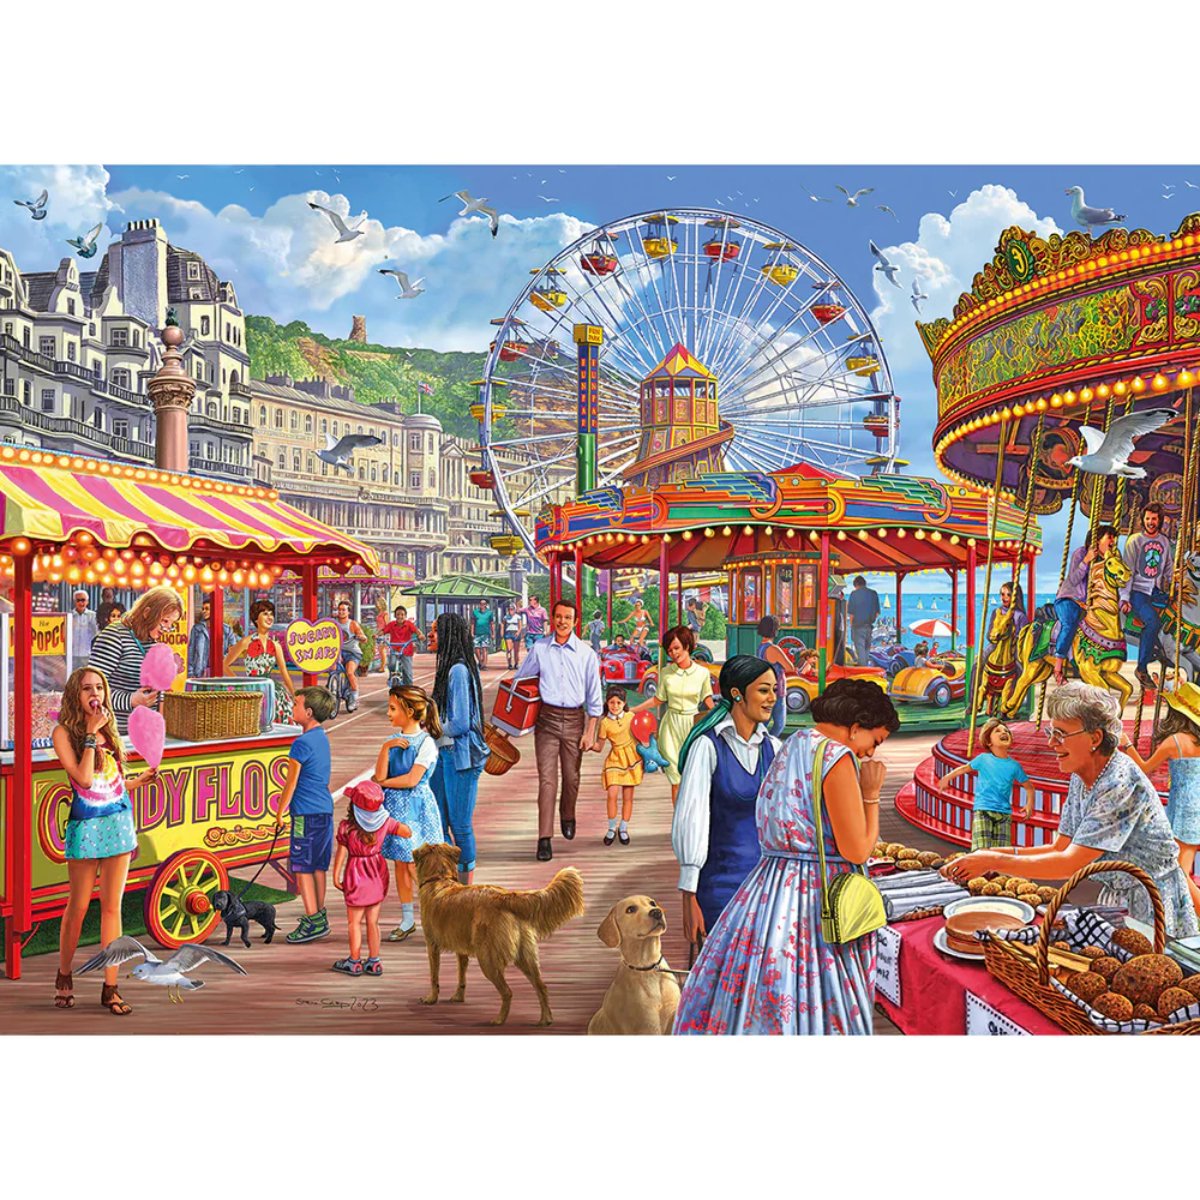 Hastings Promenade - Gibsons 1000 Piece Jigsaw Puzzle - Phillips Hobbies